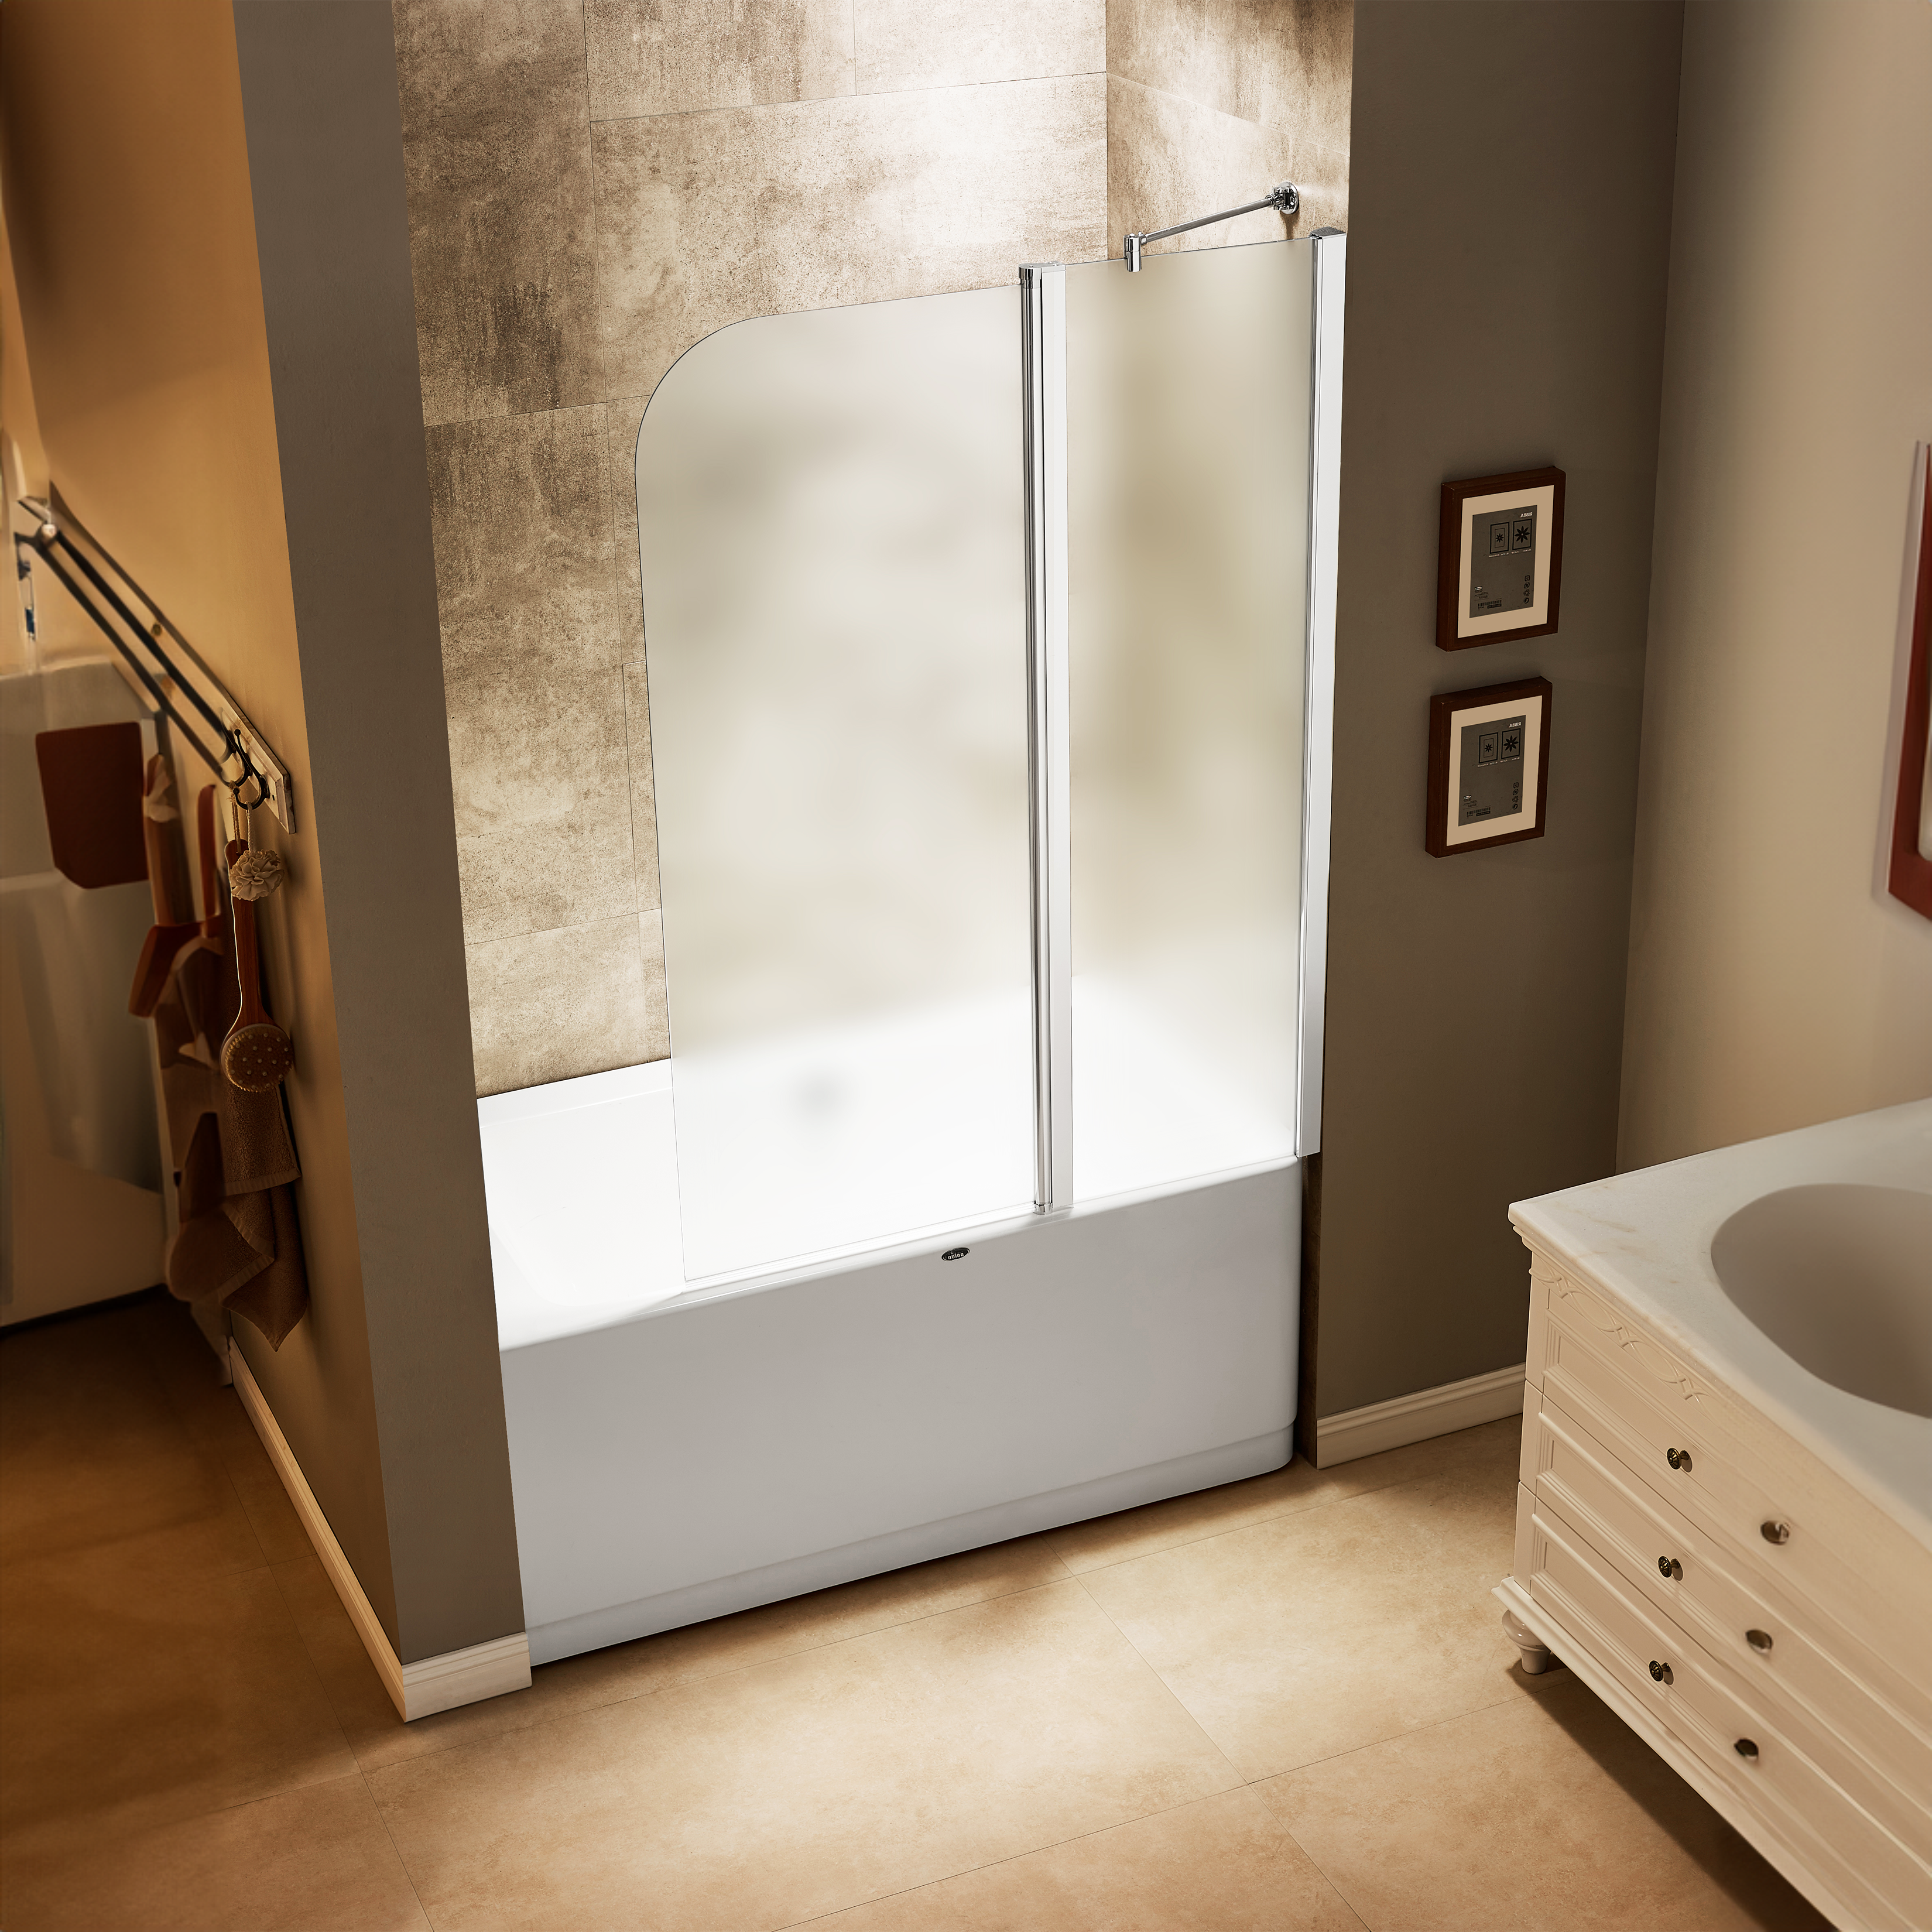 Dreamwerks 43 in. W x 59 in. H Frameless Pivot Tub Door in Chrome - Available in Clear or Frosted Glass